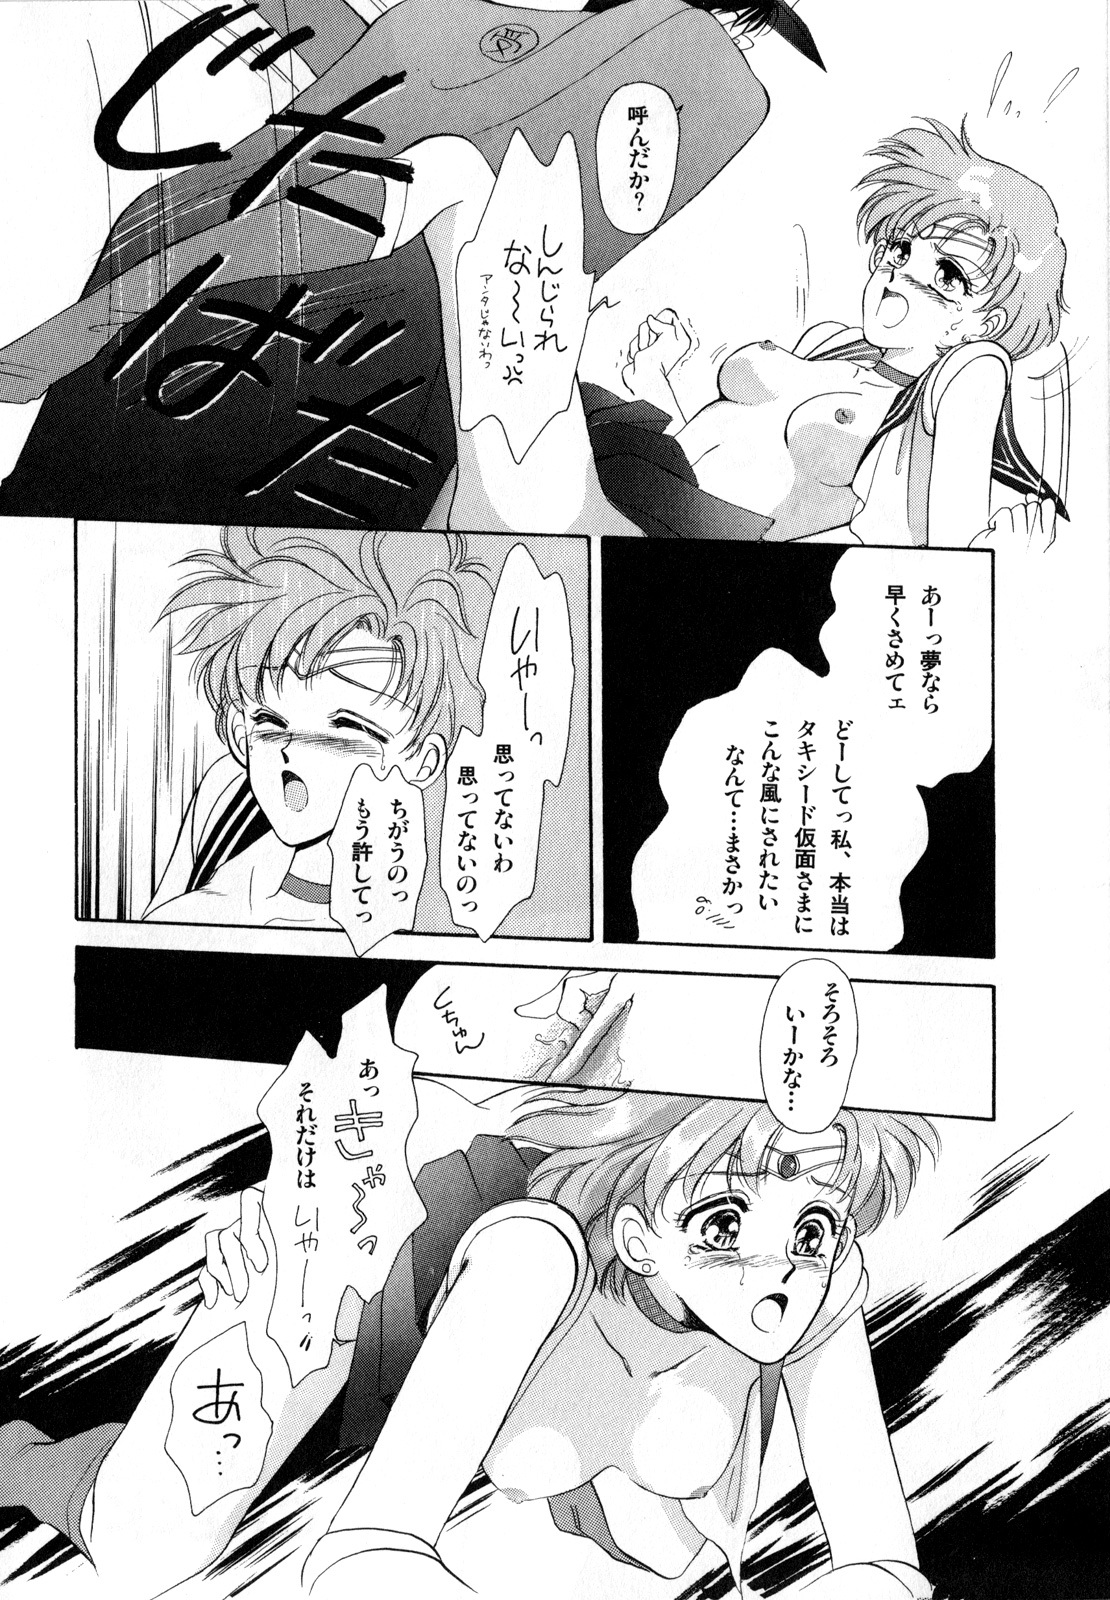 [Anthology] Lunatic Party 1 (Sailor Moon) page 13 full